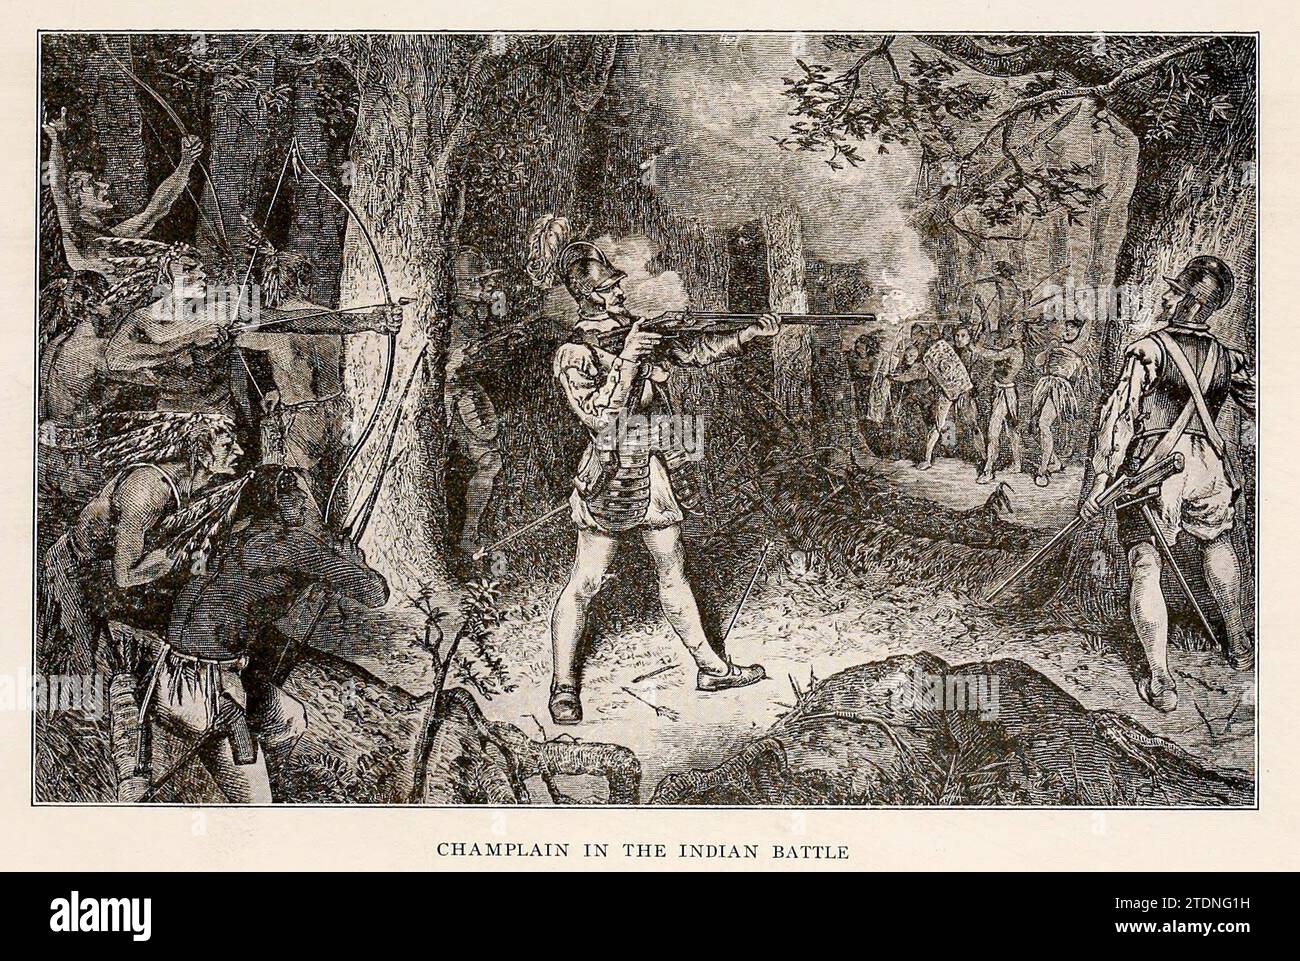 Champlain in the Indian Battle from the book A wonderland of the East, comprising the lake and mountain region of New England and eastern New York; a book for those who love to wander among beautiful lakes and rivers, valleys and mountains, or in places made famous by historic men and events; to which is added an afterword on the worth-while in this wonderland of the East, with some suggestions to motor-tourists on how best to find it by Kitchin, William Copeman. Publication date 1920 Publisher: The Page company Stock Photo